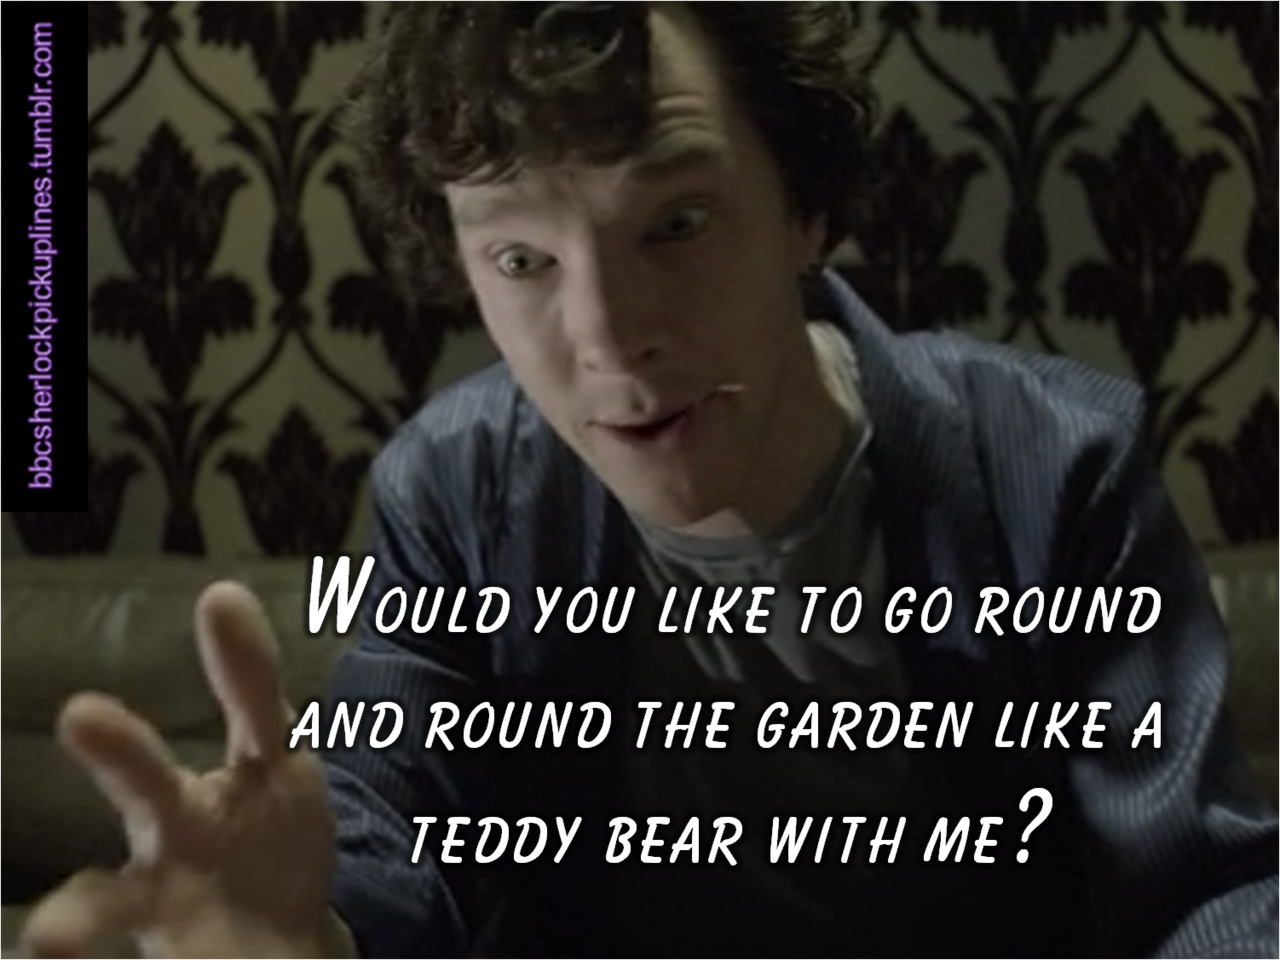 &ldquo;Would you like to go round and round the garden like a teddy bear with